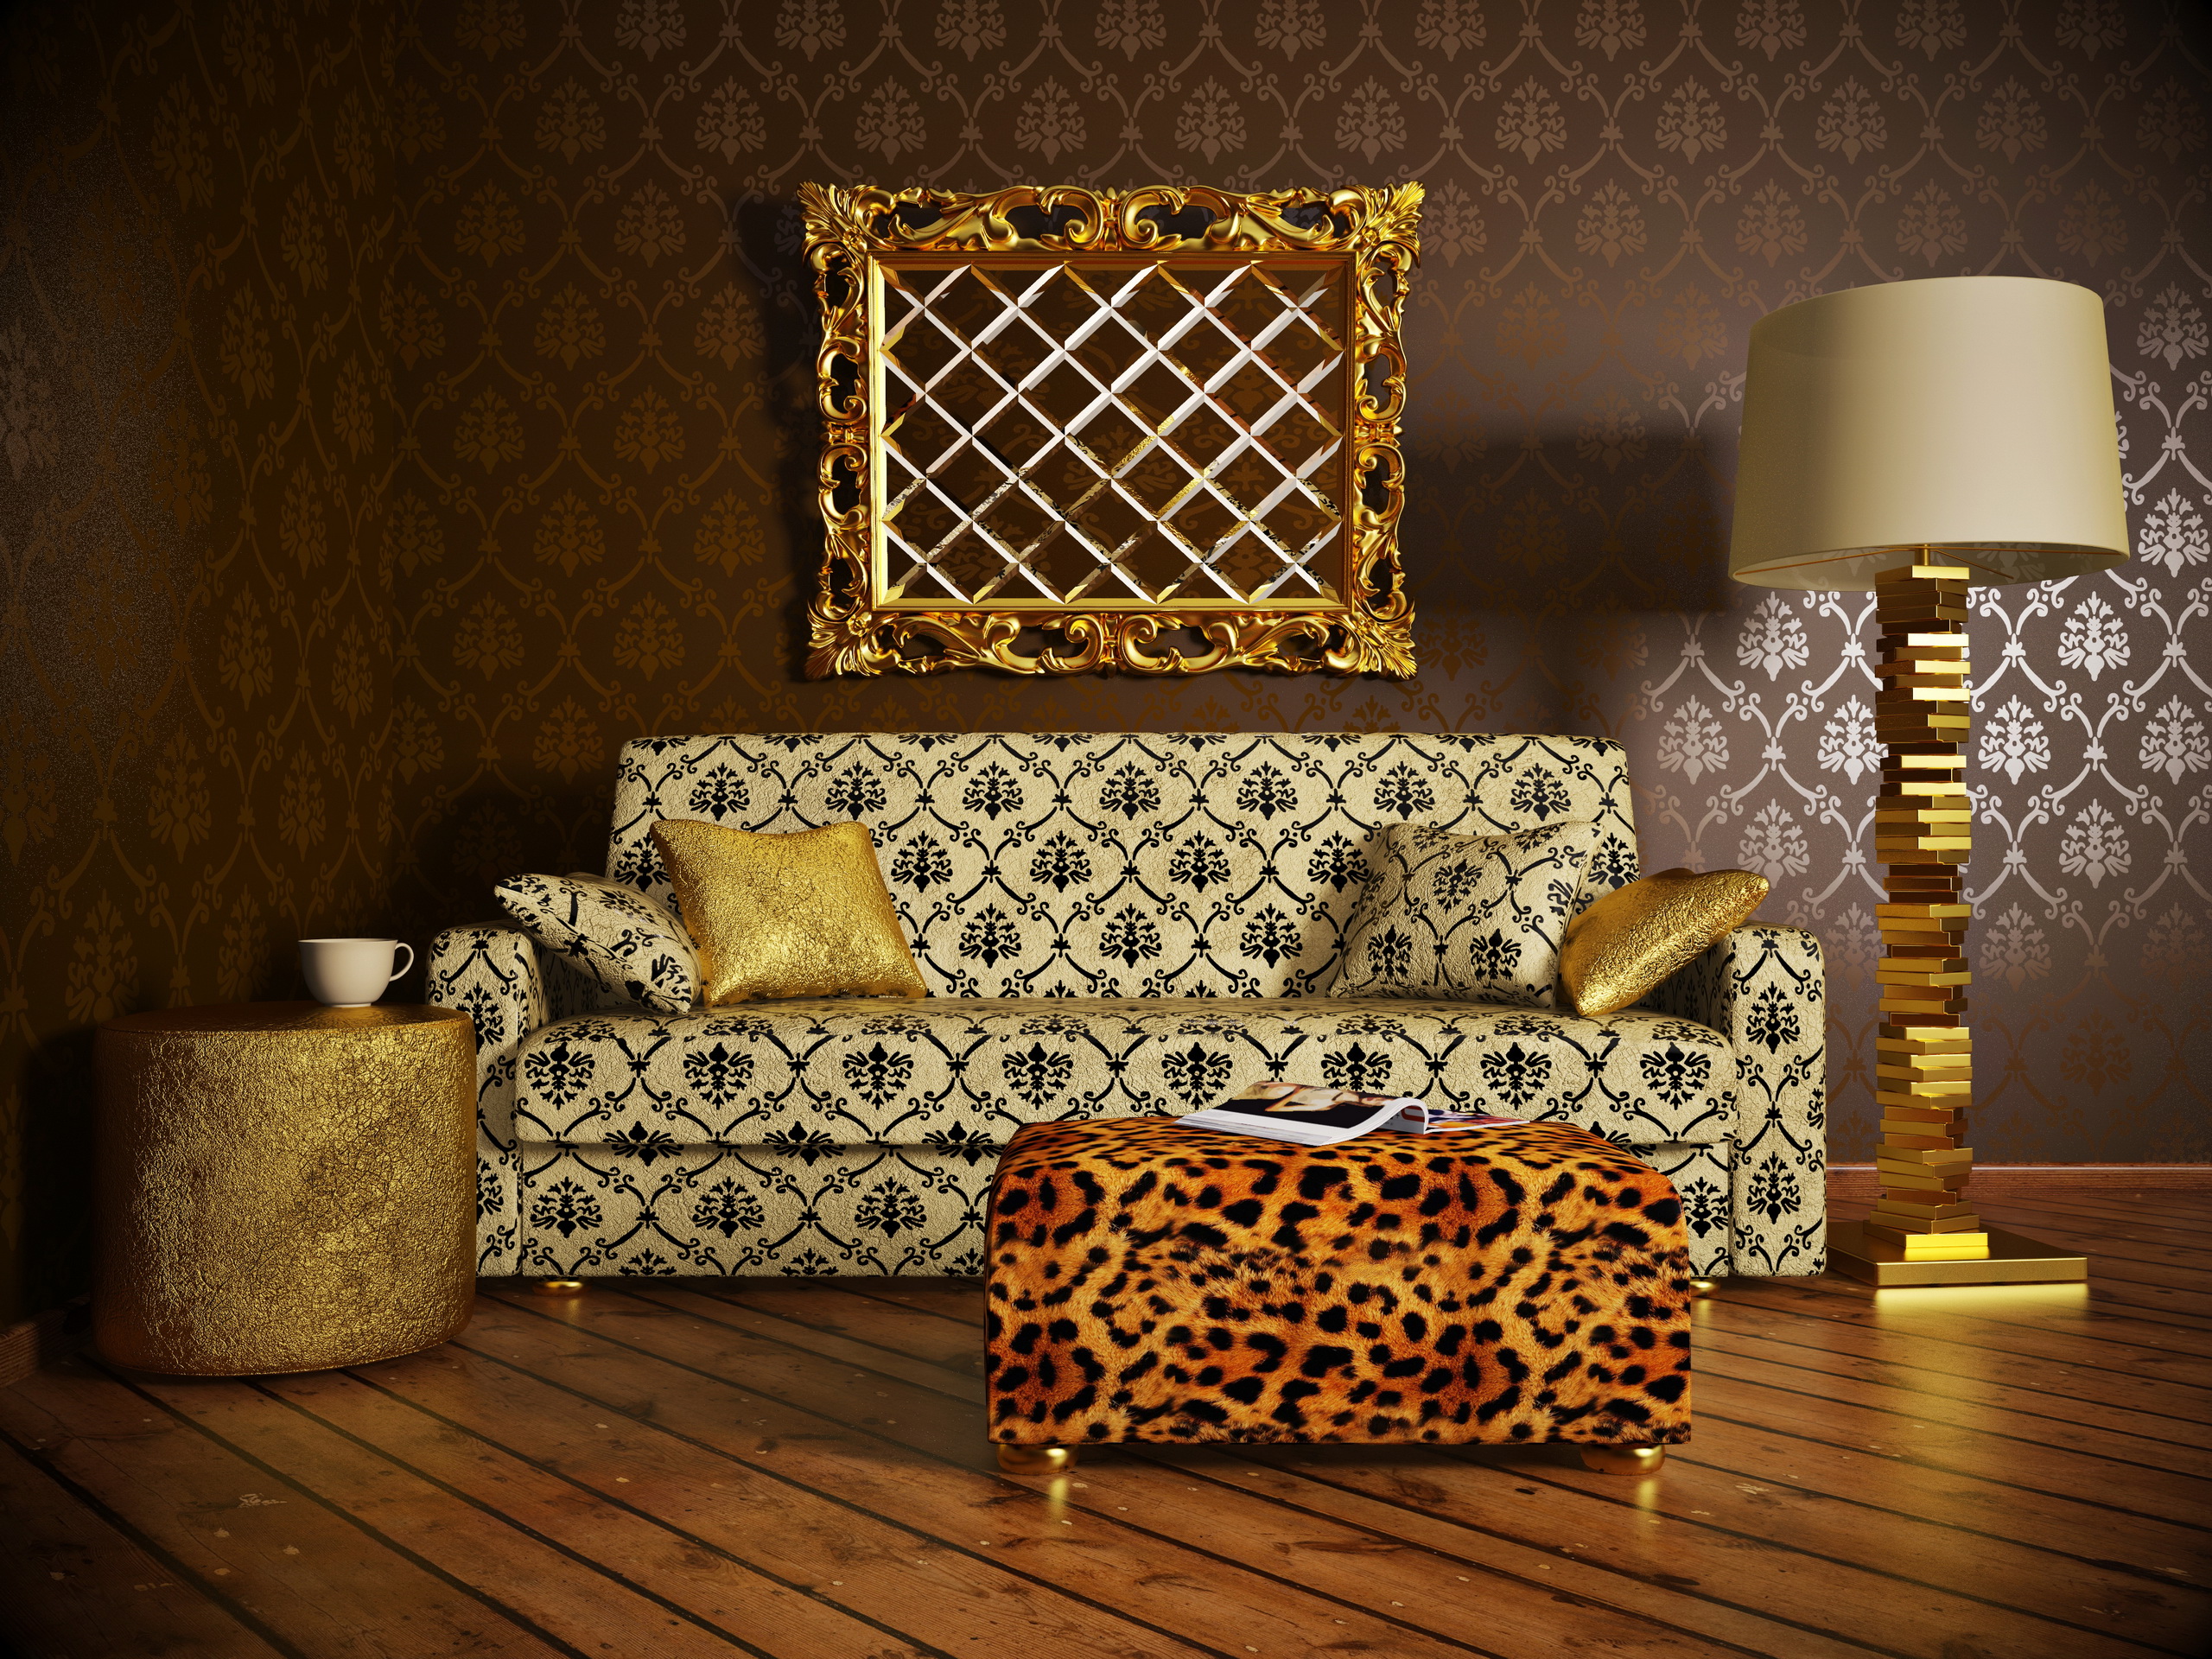 Couch Furniture Golden Lamp Room 2560x1920